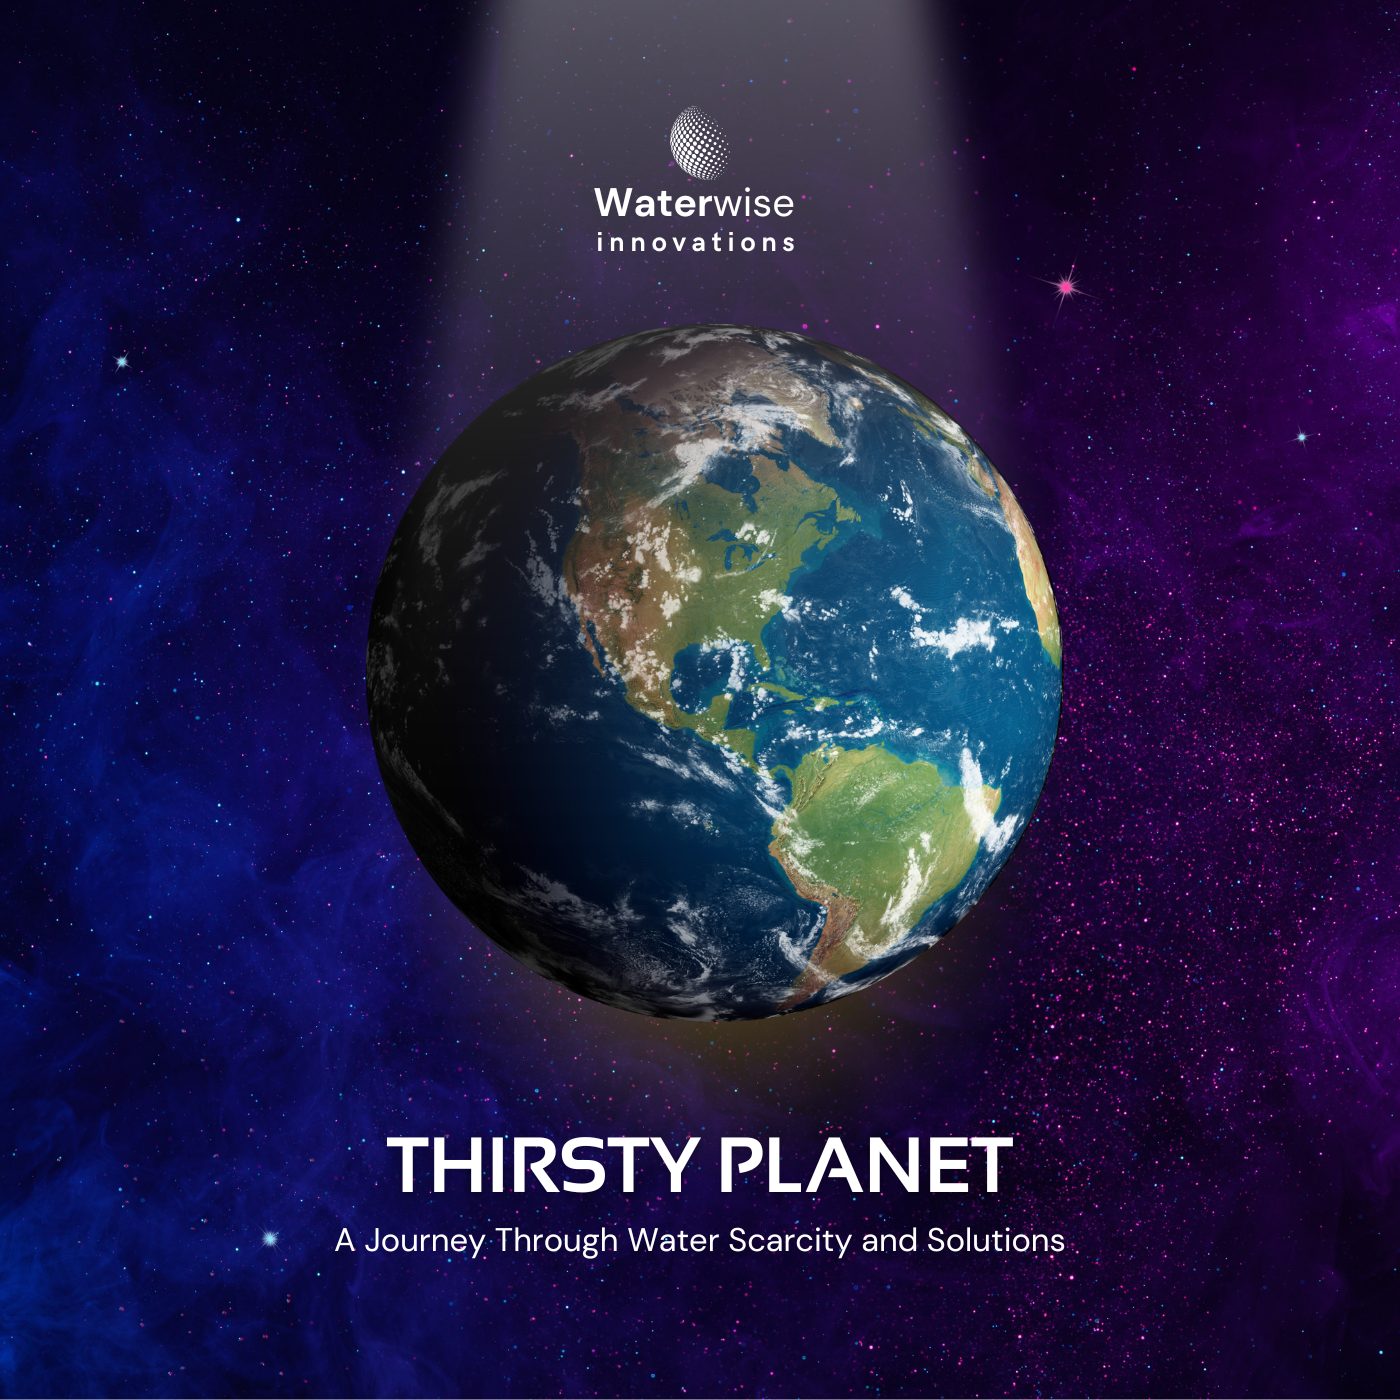 Thirsty Planet A Journey Through Water Scarcity and Solutions Audiobook Cover